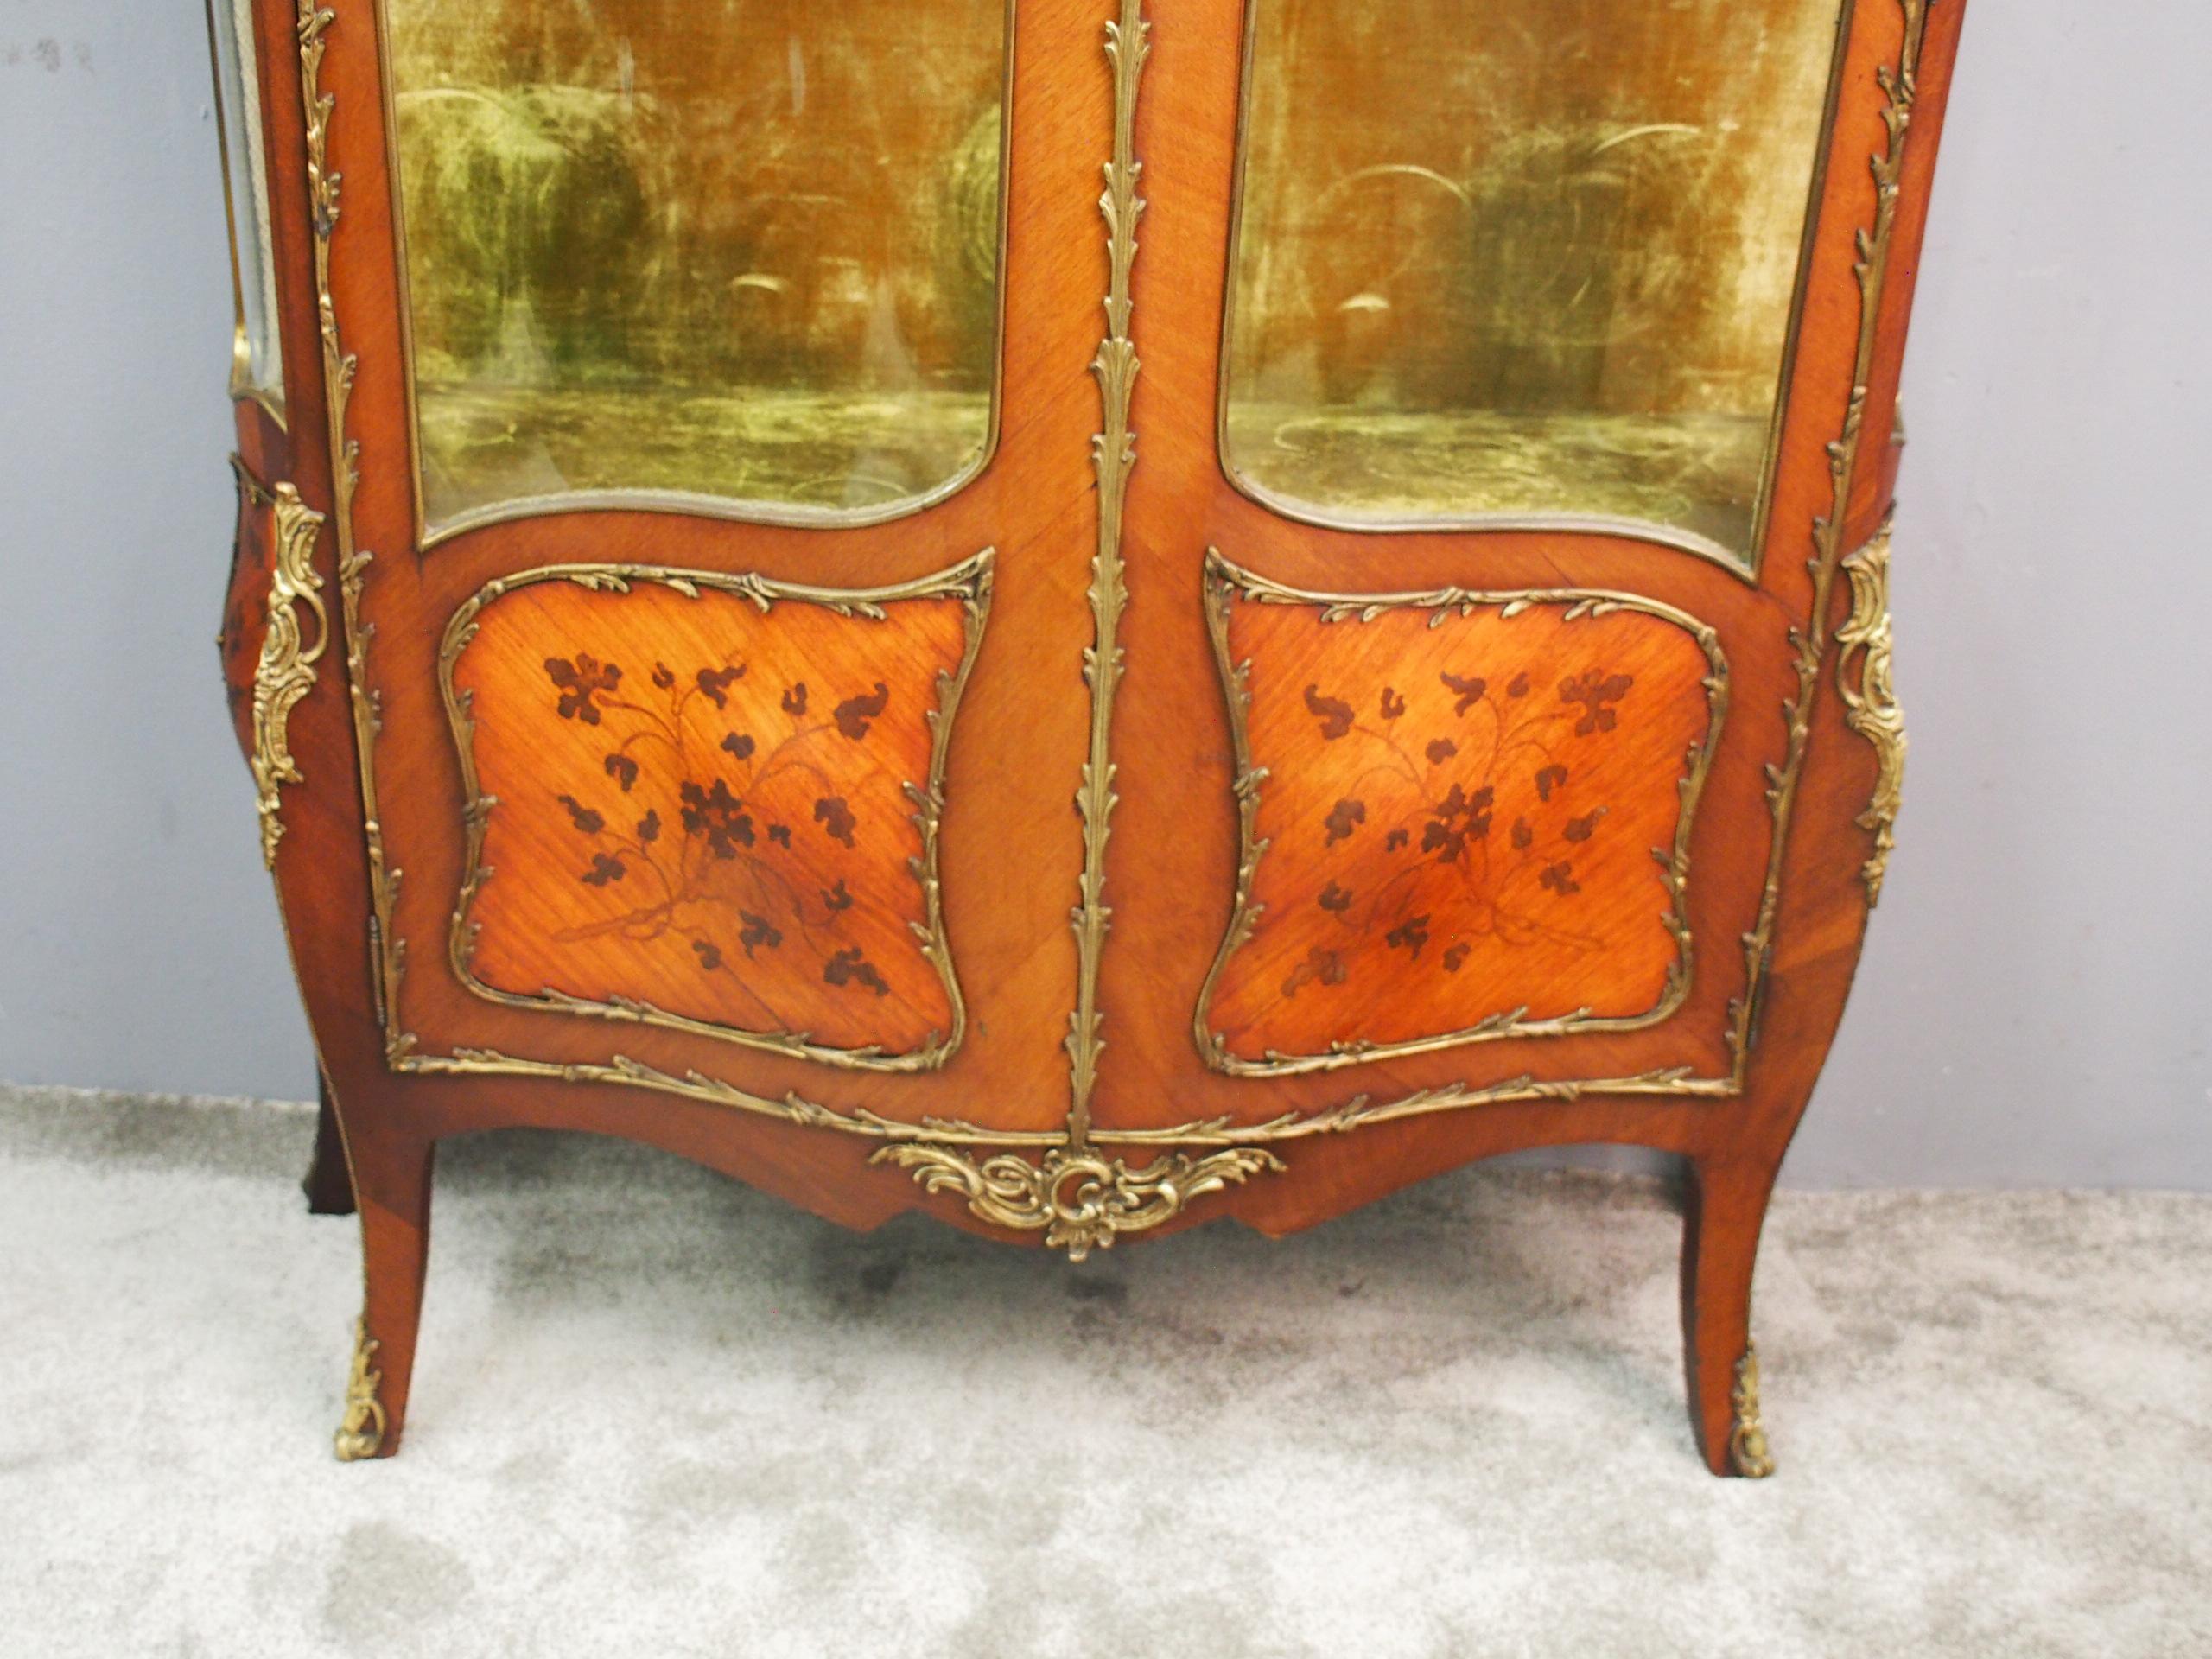 French, serpentine-fronted, ormolu mounted kingwood and walnut display cabinet. The domed top is surmounted by a Rococo ormolu cartouche over an ormolu mounted side glazing and the doors show the velvet-lined interior with glazed shelving. The lower